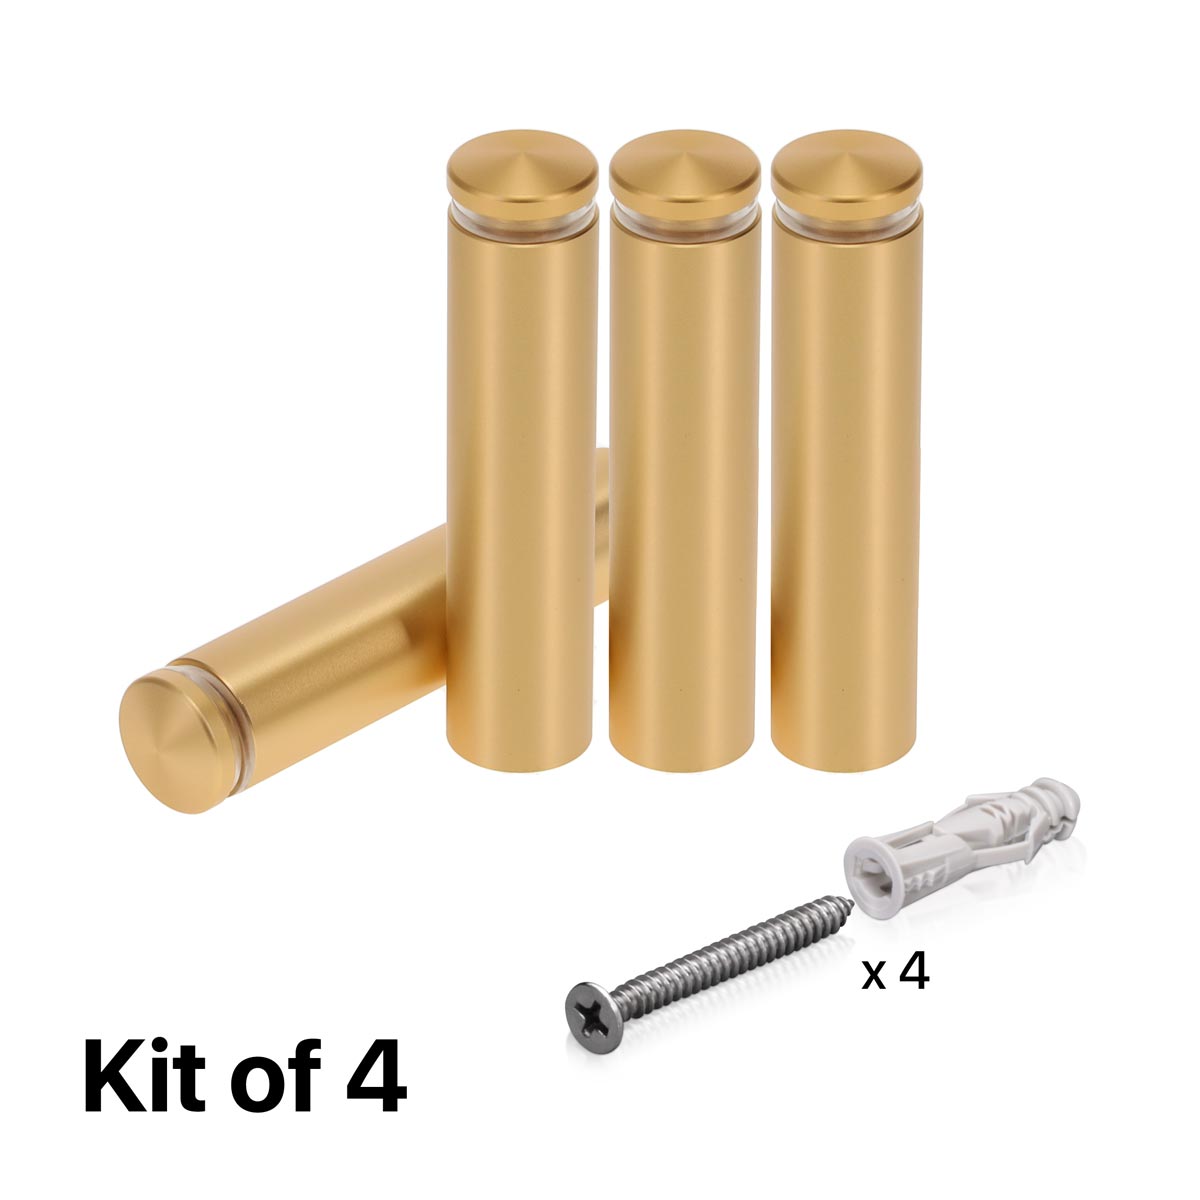 (Set of 4) 5/8'' Diameter X 2-1/2'' Barrel Length, Alumi. Rounded Head Standoffs, Matte Champagne Anodized Finish Standoff with (4) 2208Z Screw and (4) LANC1 Anchor for concrete or drywall (For In / Out use) [Required Material Hole Size: 7/16'']